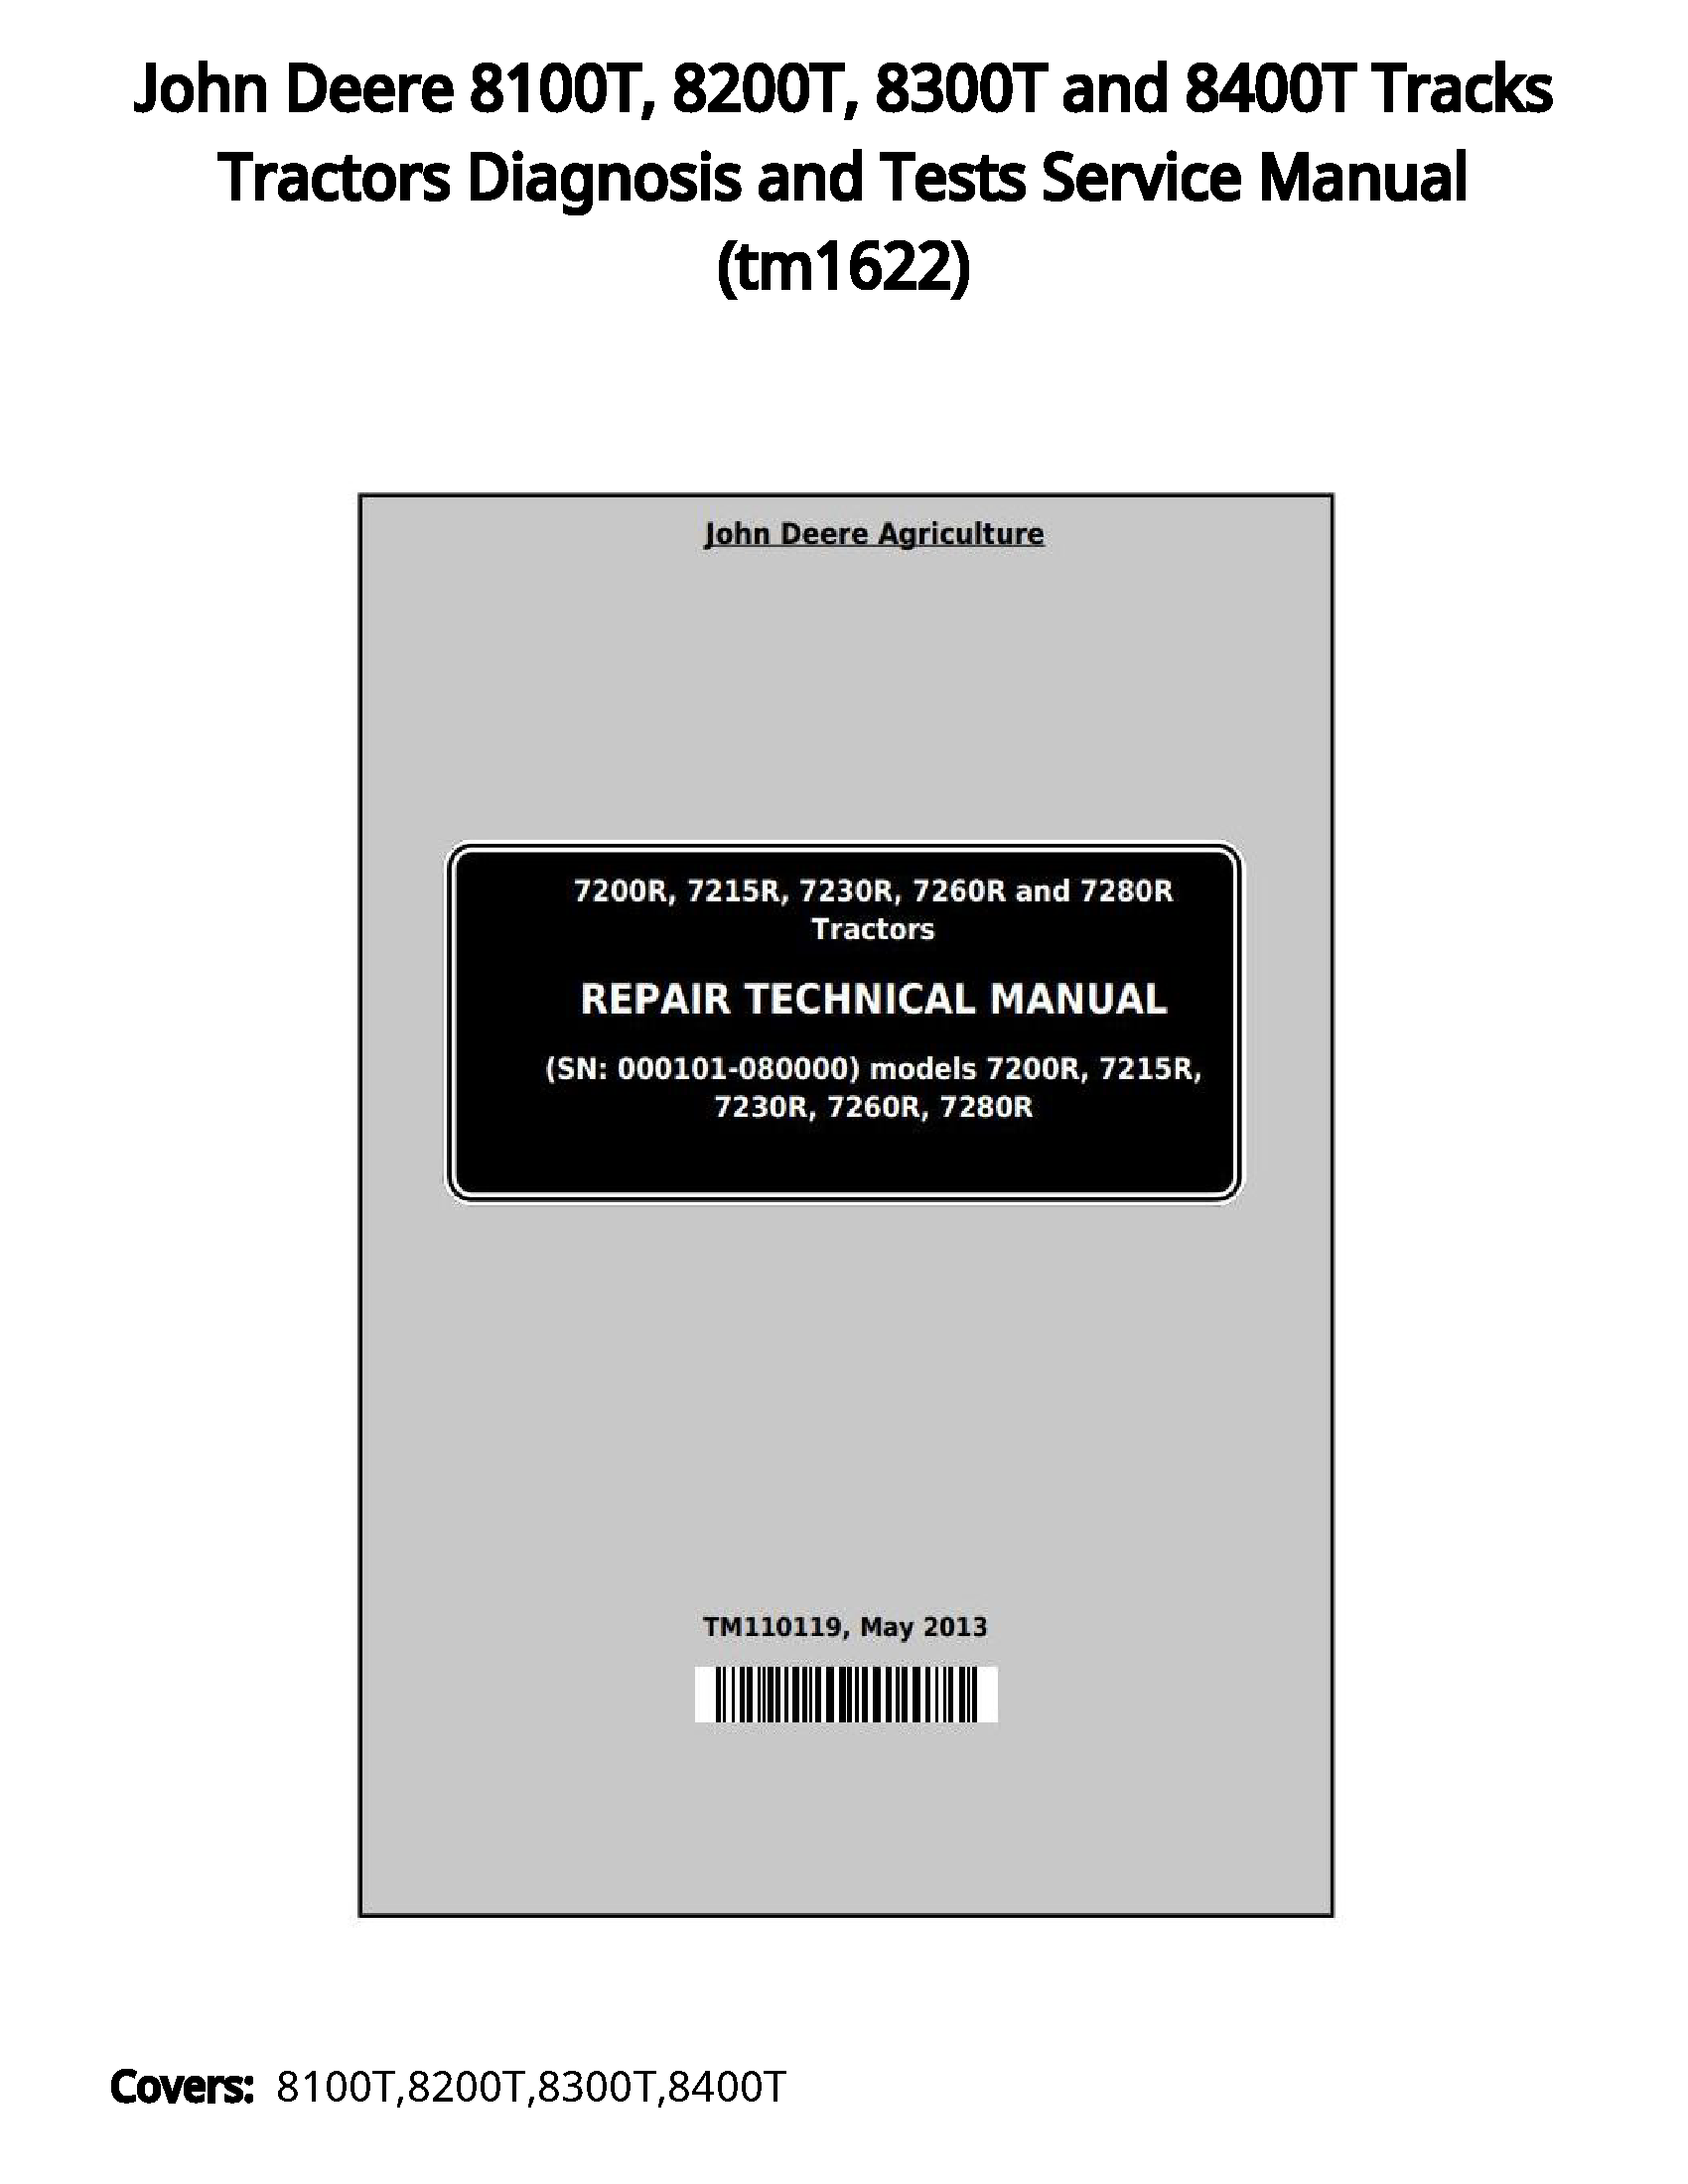 John Deere 8100T  8200T  8300T and 8400T Tracks Tractors Diagnosis and Tests Service Manual - tm1622